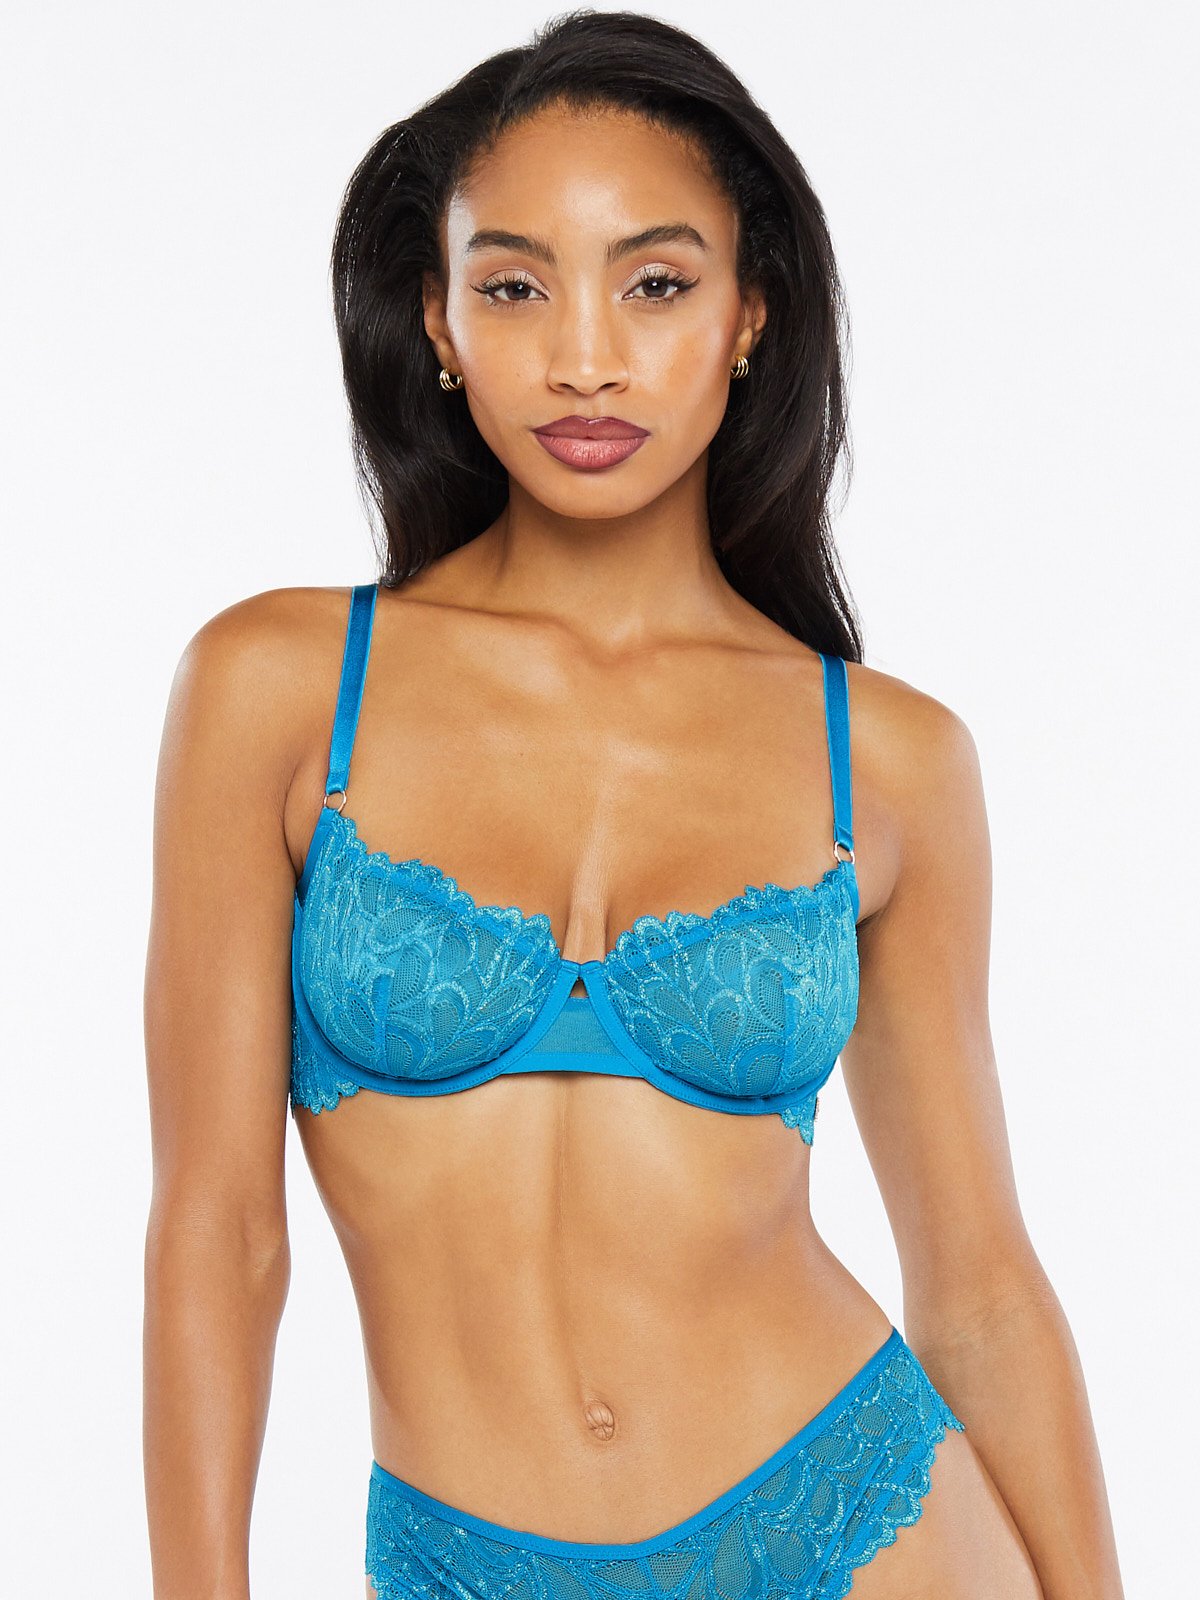 https://cdn.savagex.com/media/images/products/BA2042992-1599/SAVAGE-NOT-SORRY-UNLINED-LACE-BALCONETTE-BRA-BA2042992-1599-1-1200x1600.jpg